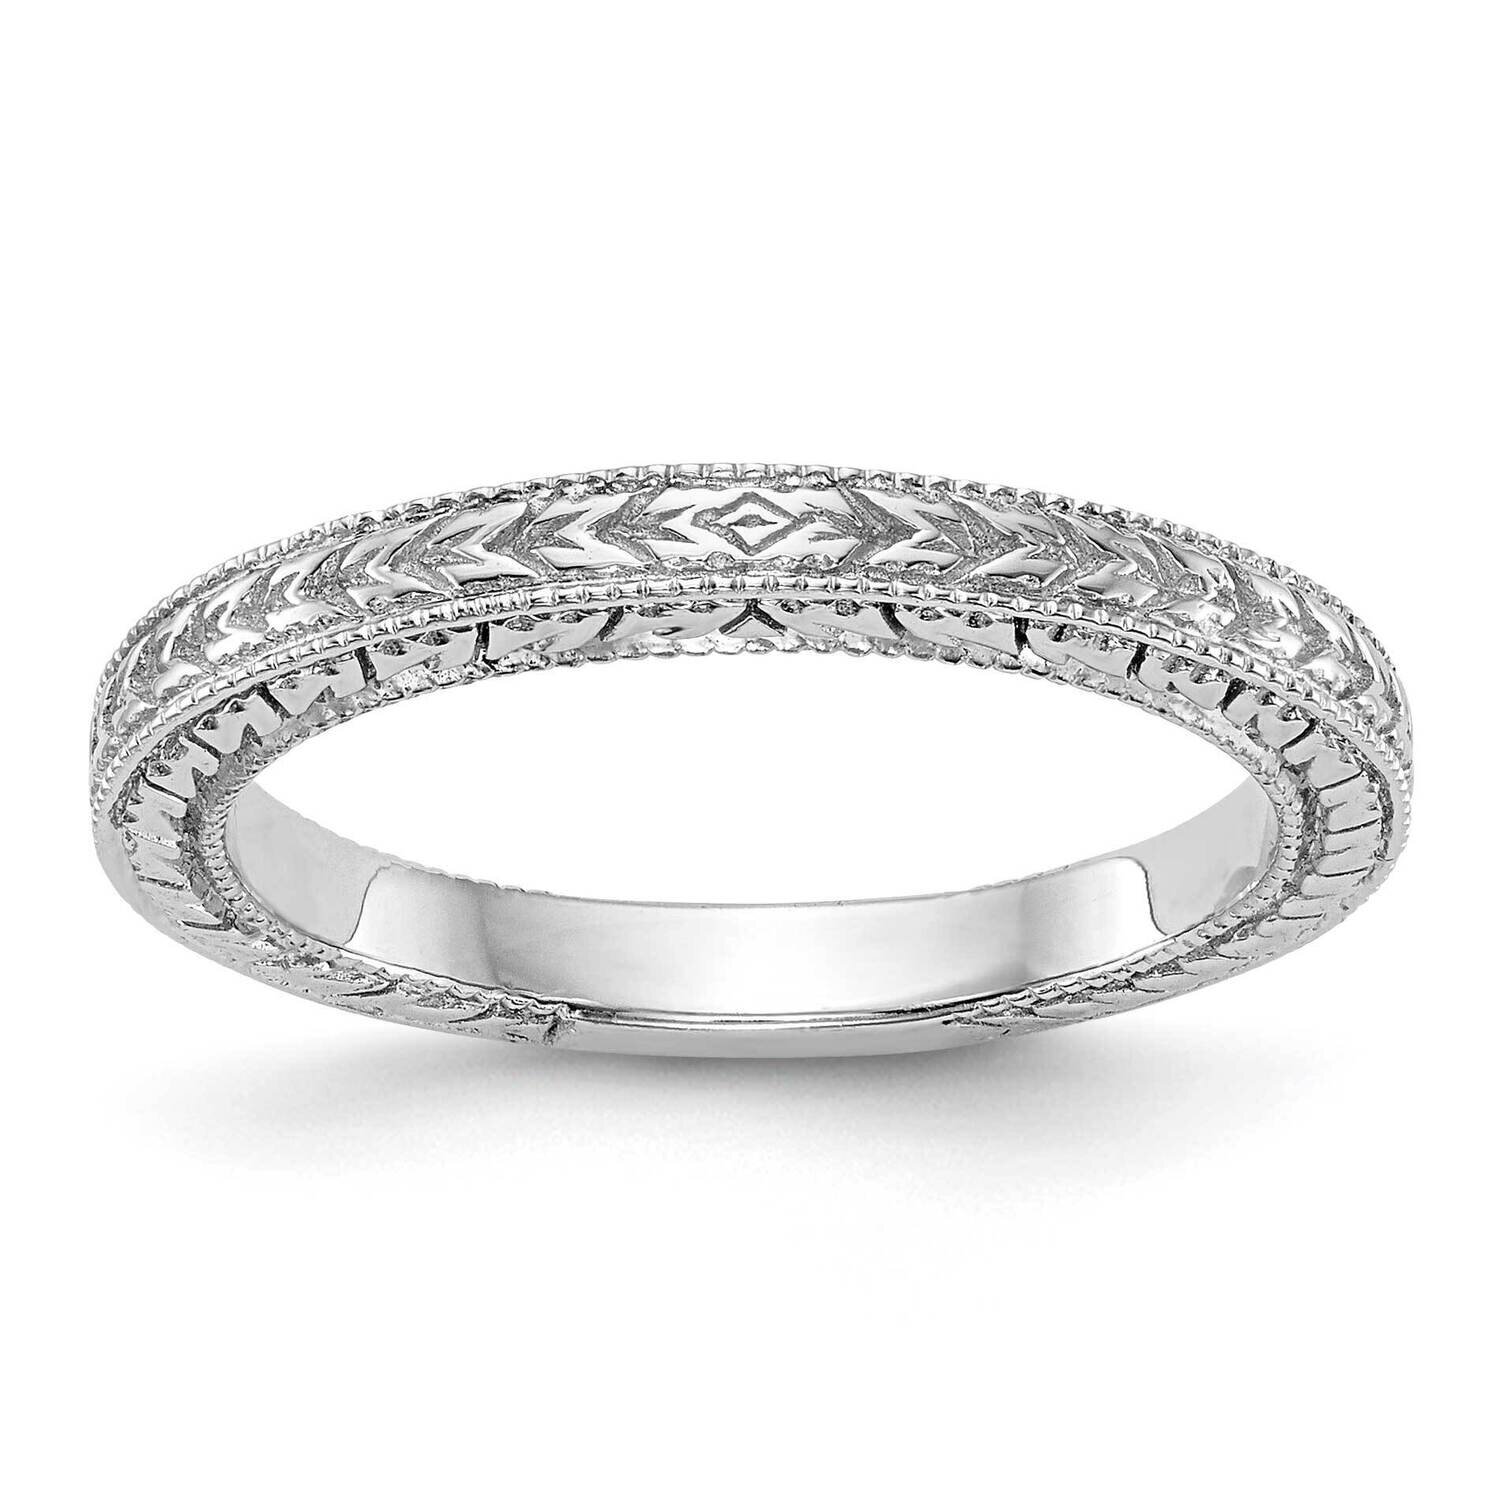 Etched Wedding Band 14k White Gold RM1992B-W